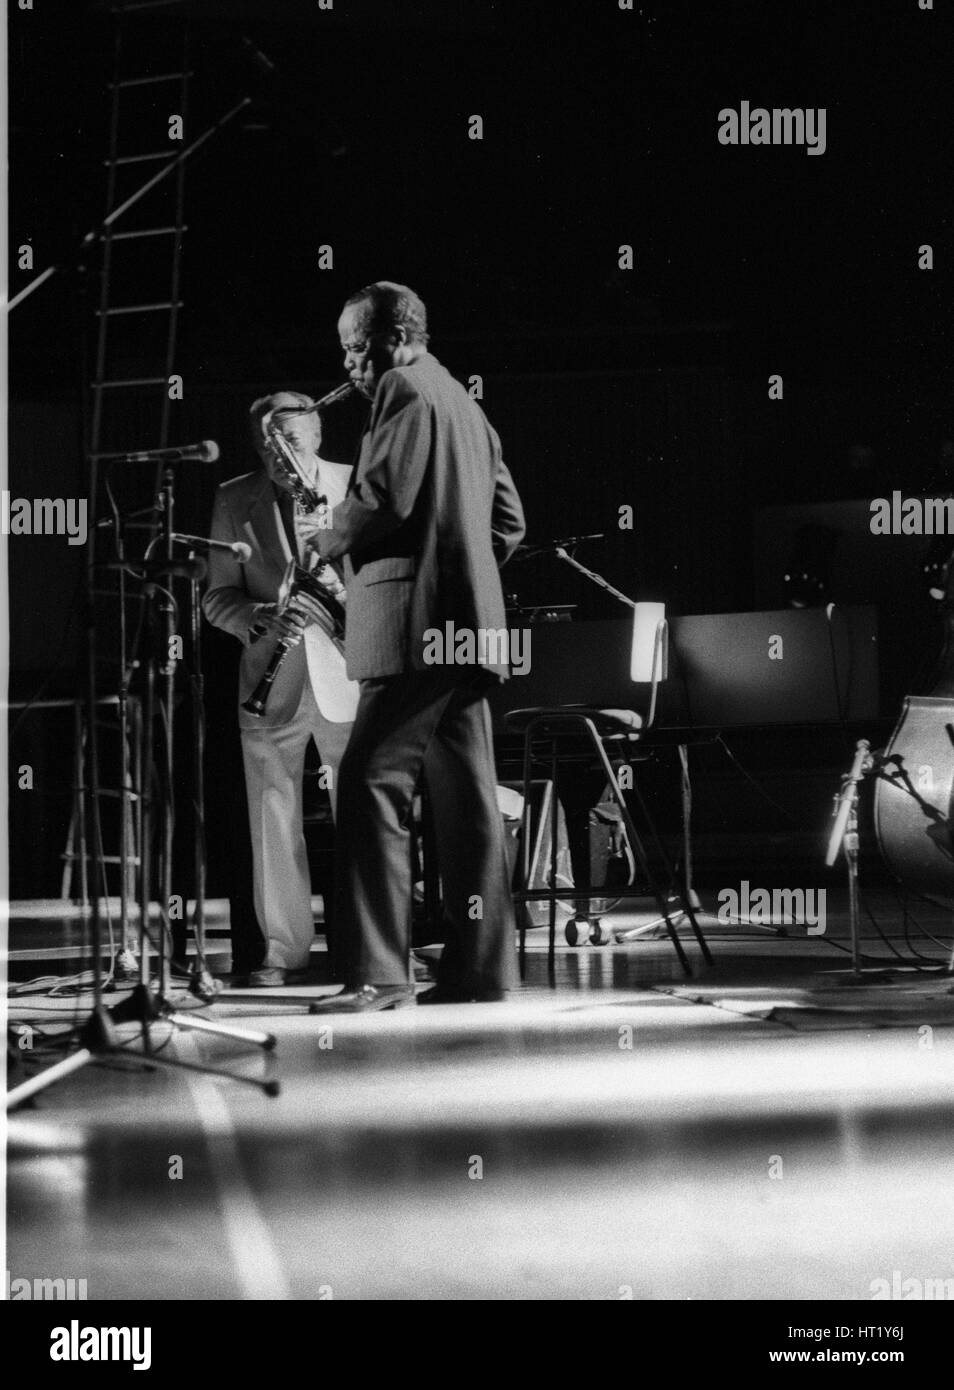 Buddy Tate and Woody Herman, Capital Jazz, Royal Festival Hall, London, July 1985.   Artist: Brian O'Connor. Stock Photo